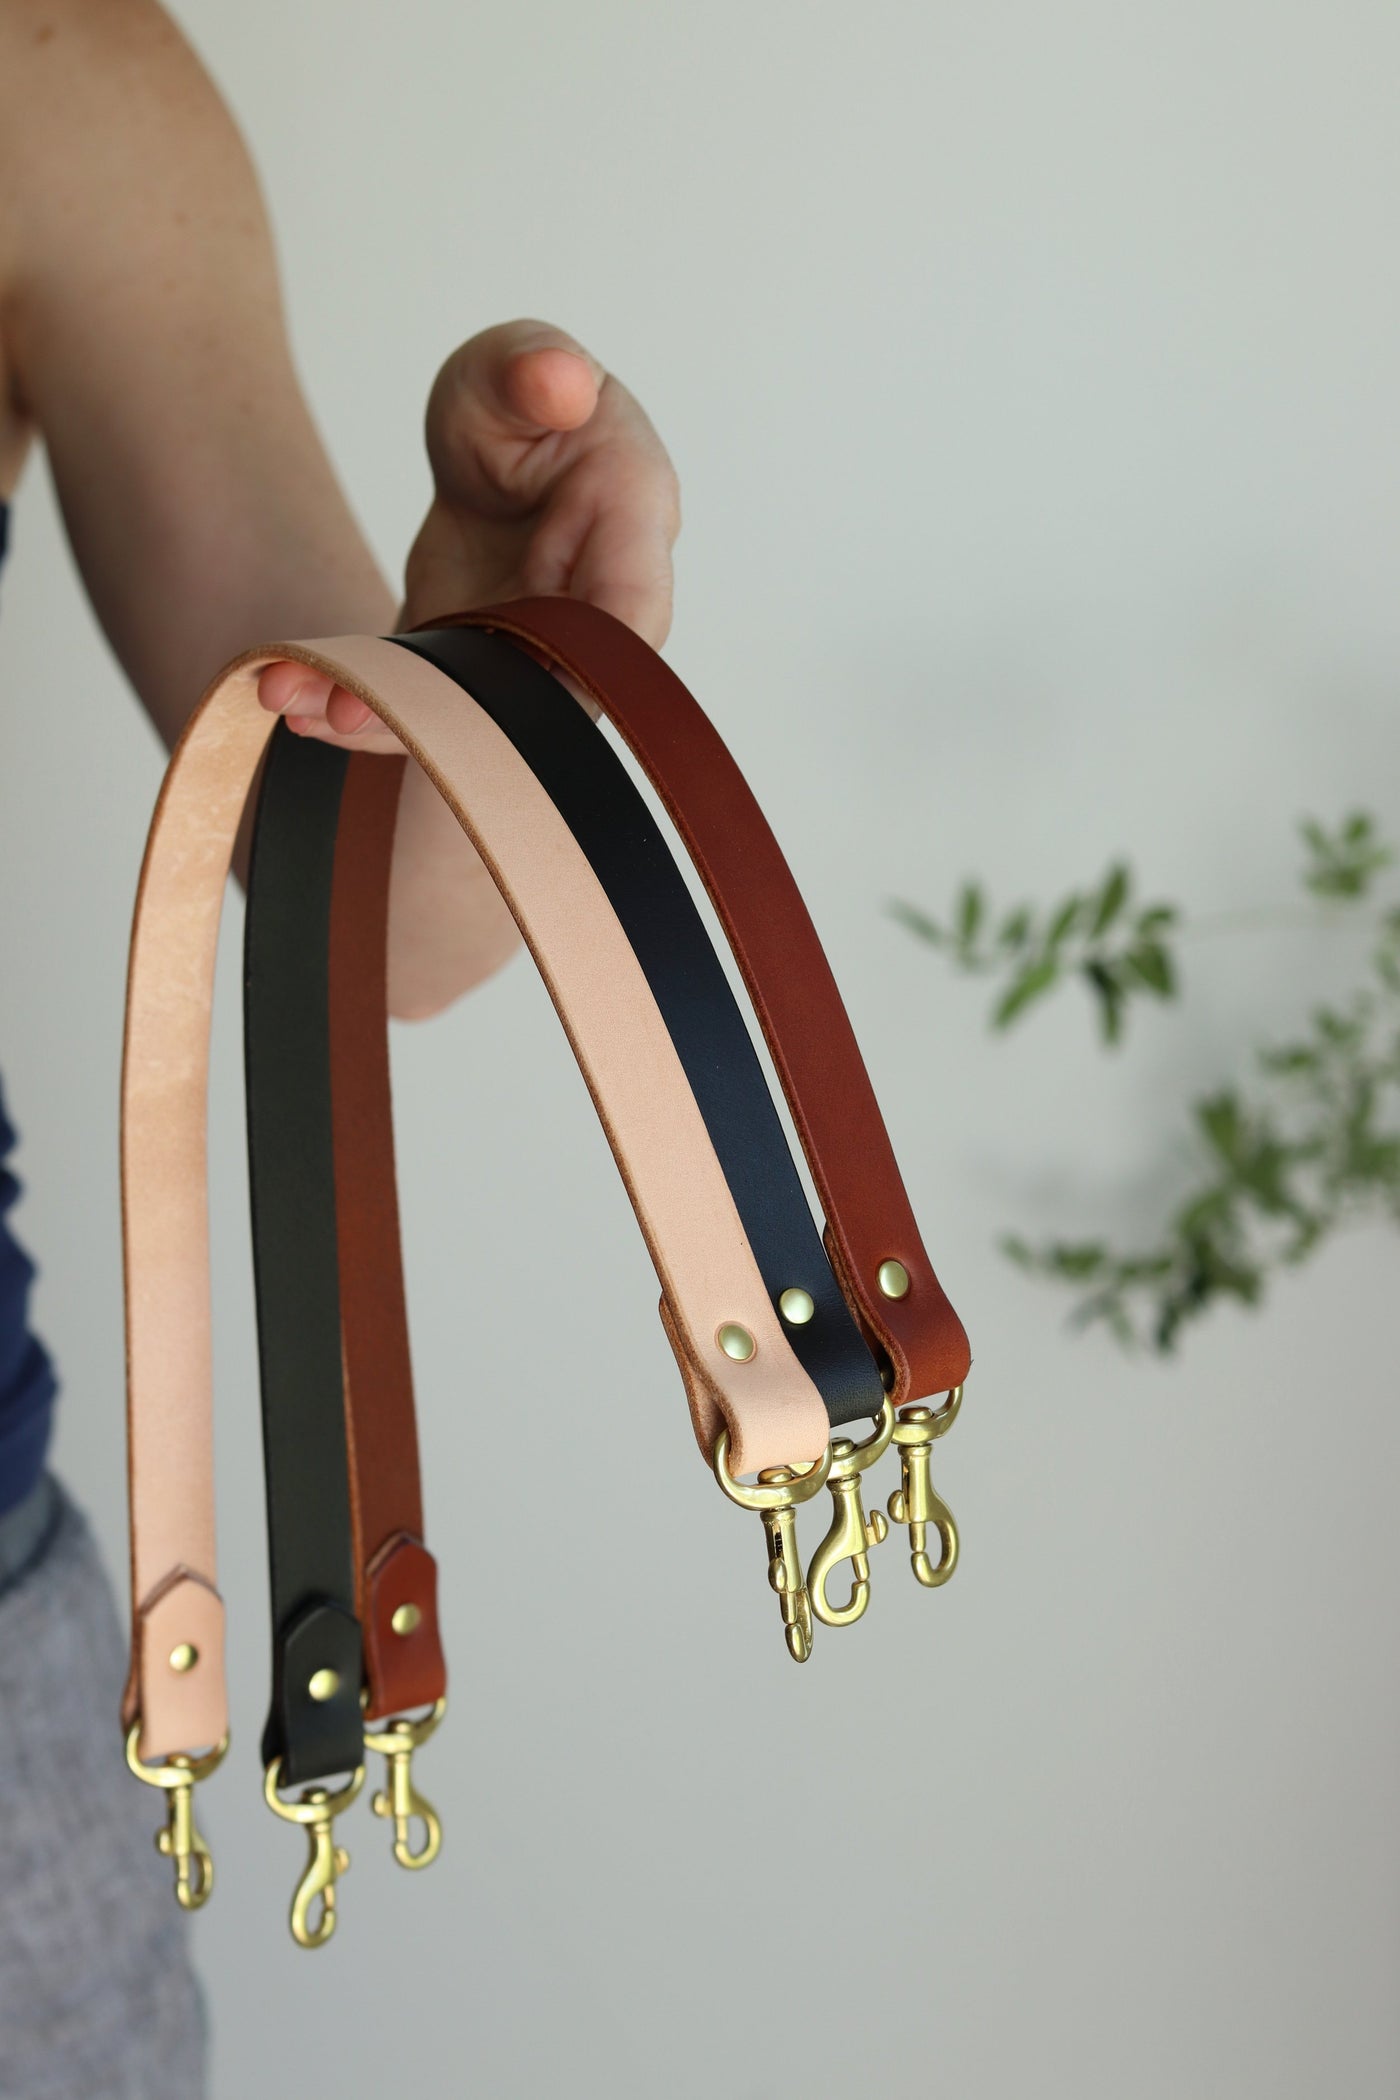 Leather Shoulder Strap with Double-sided Tan Leather 3/4 wide